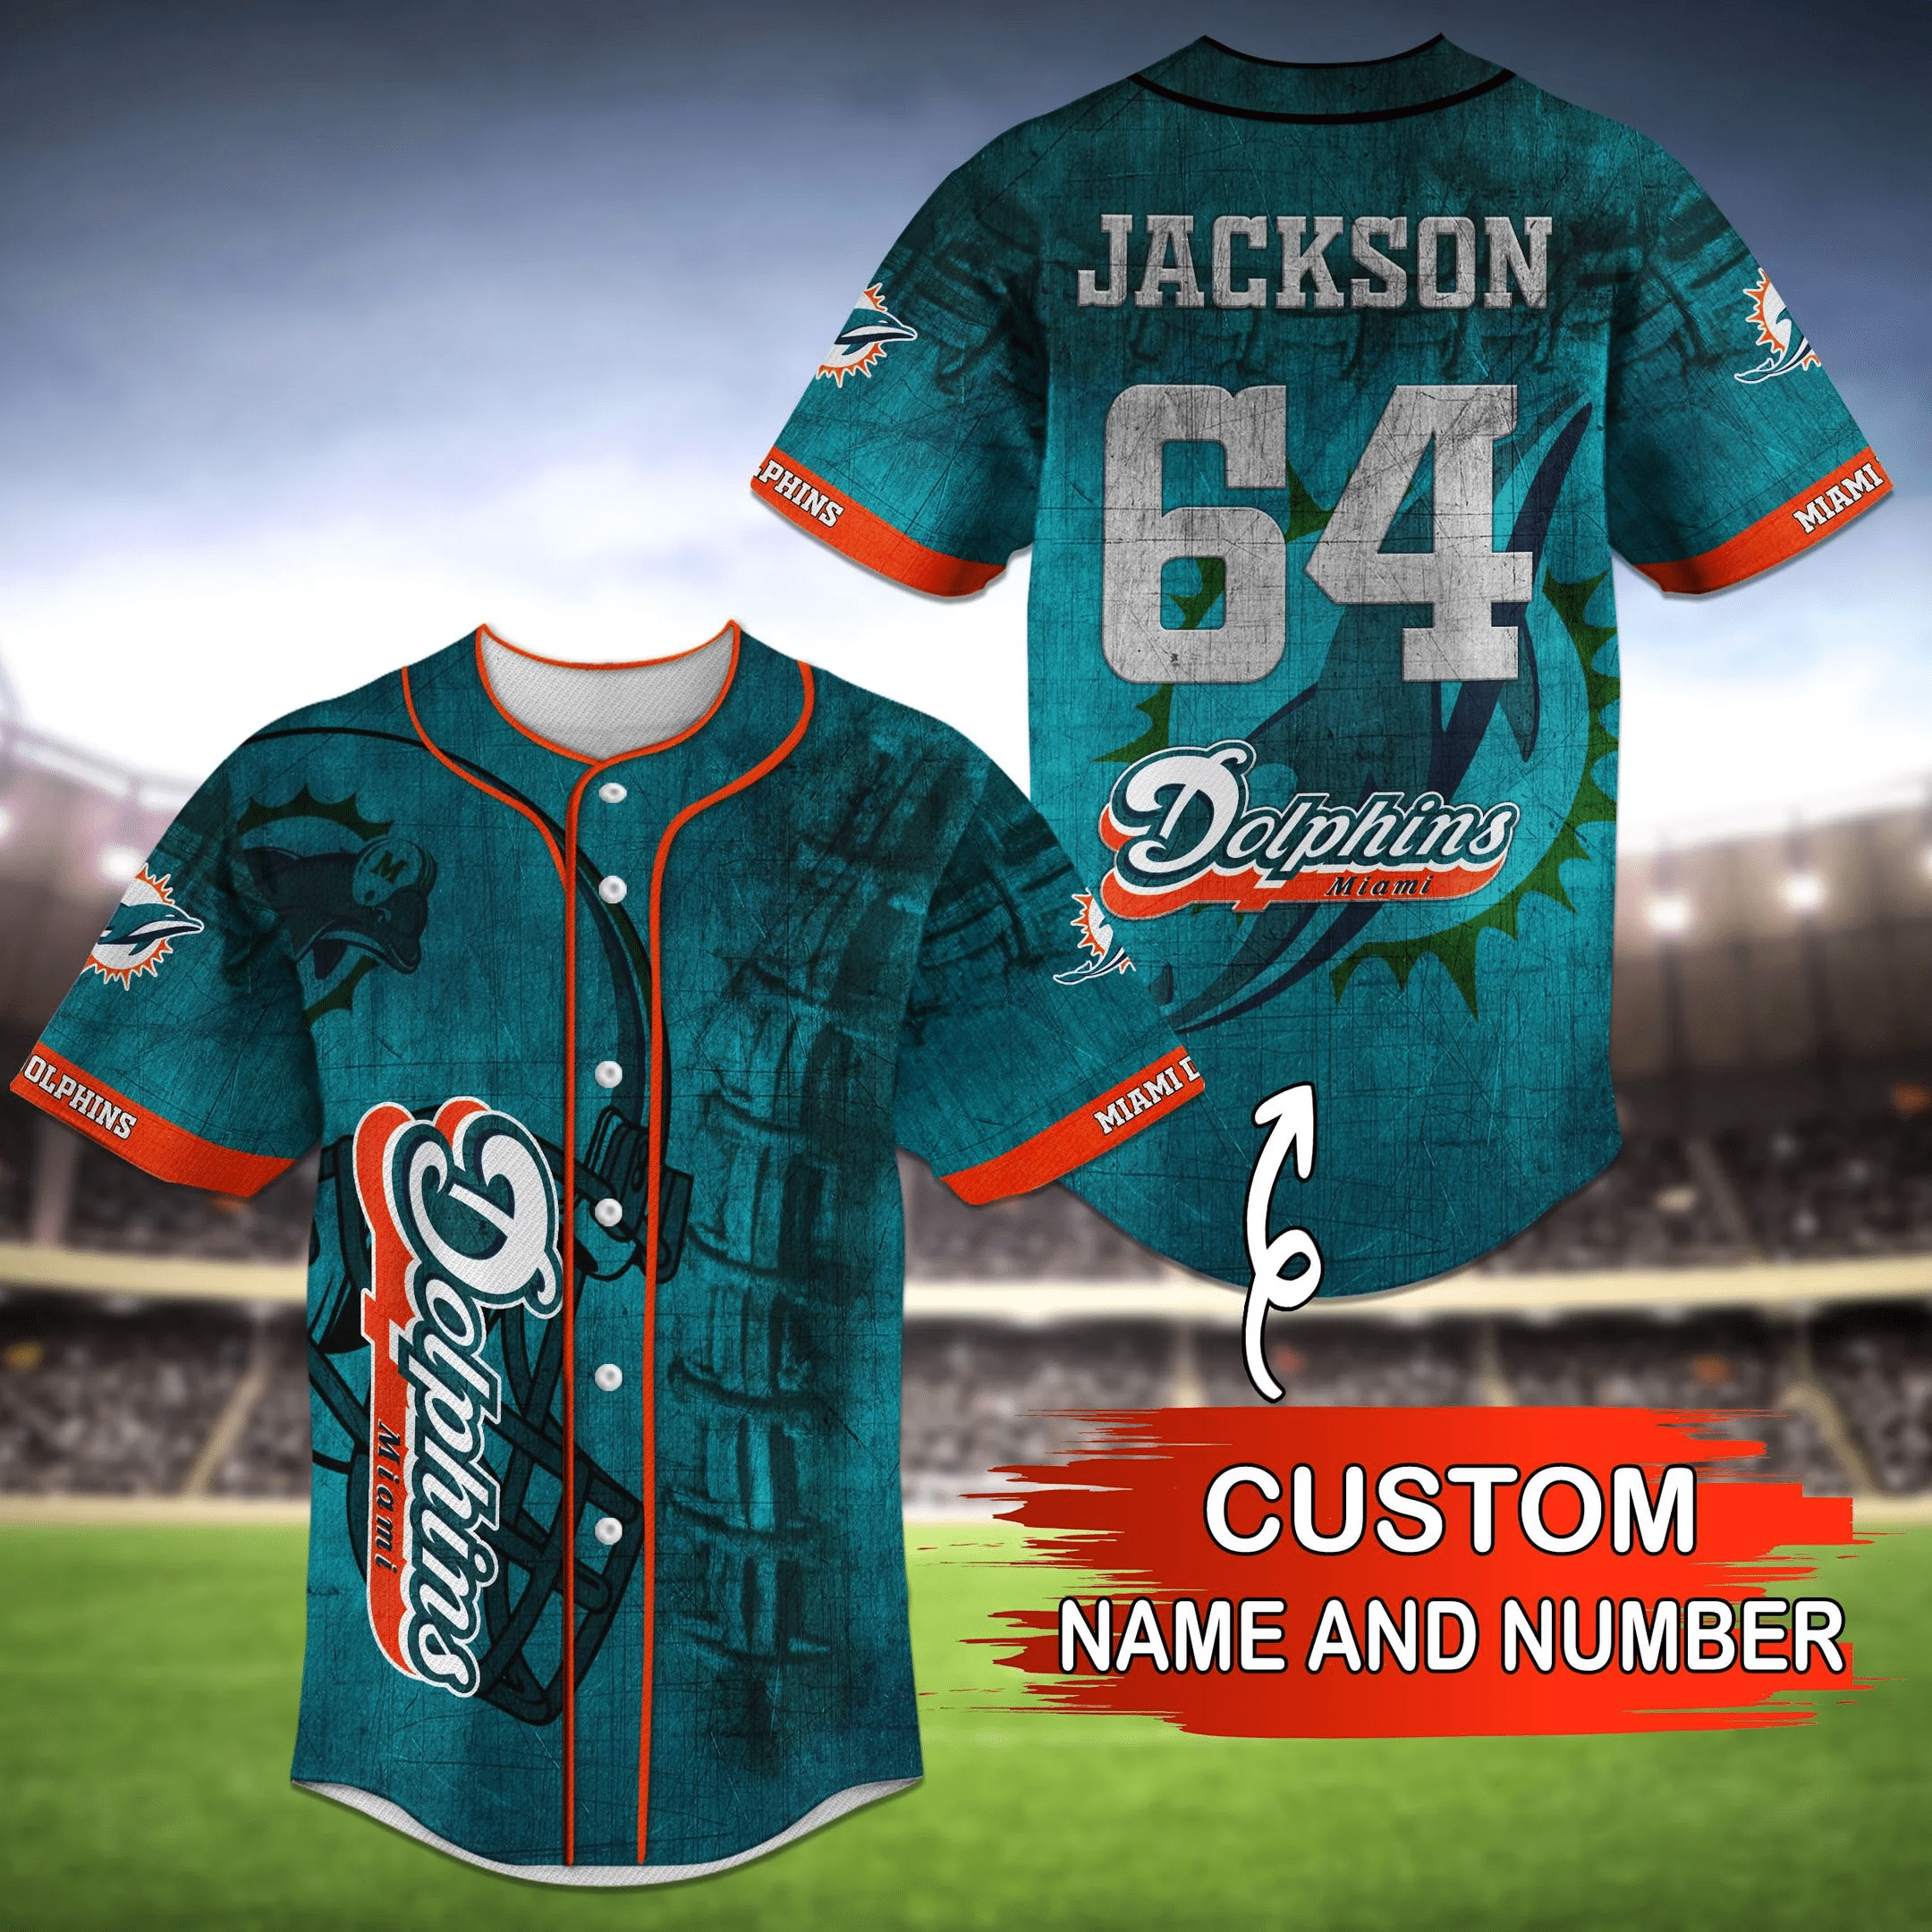 Miami Dolphins NFL Personalized Personalized Name Baseball Jersey Shirt FVJ